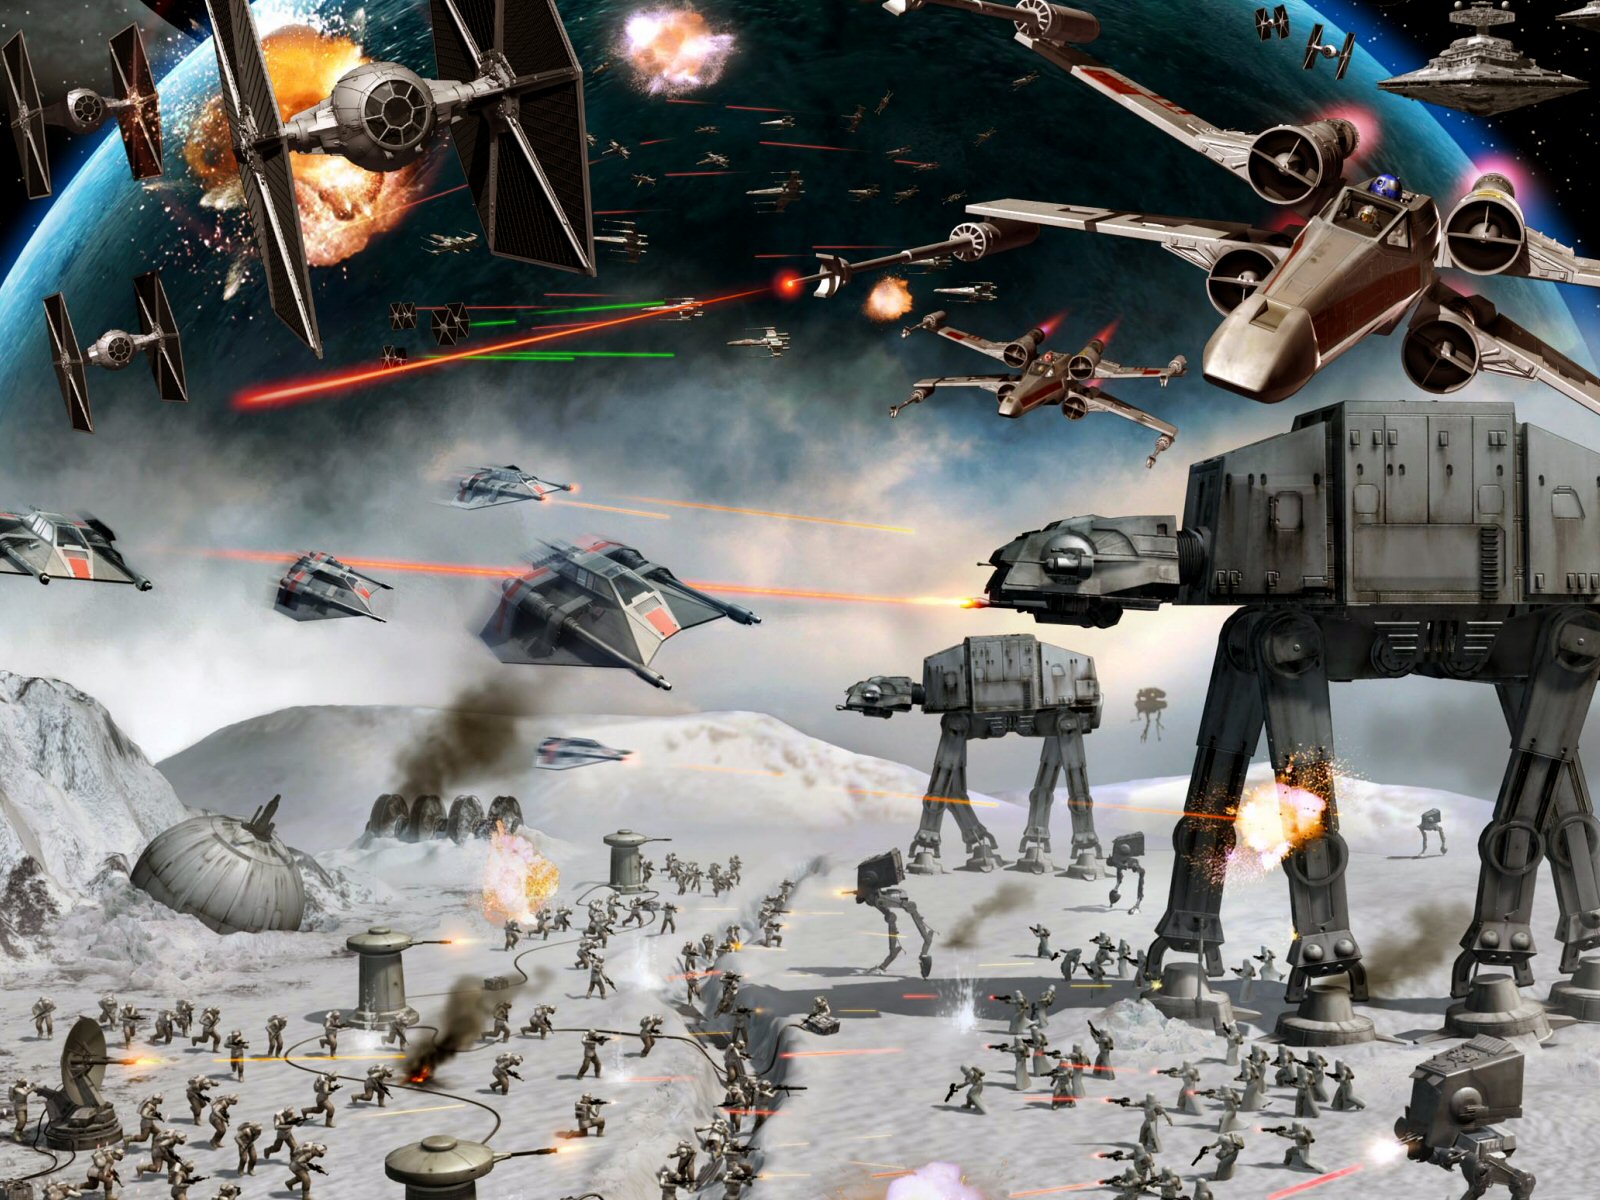 Published May 20 2009 at 1600 1200 in Star Wars Wallpaper Set 1 1600x1200